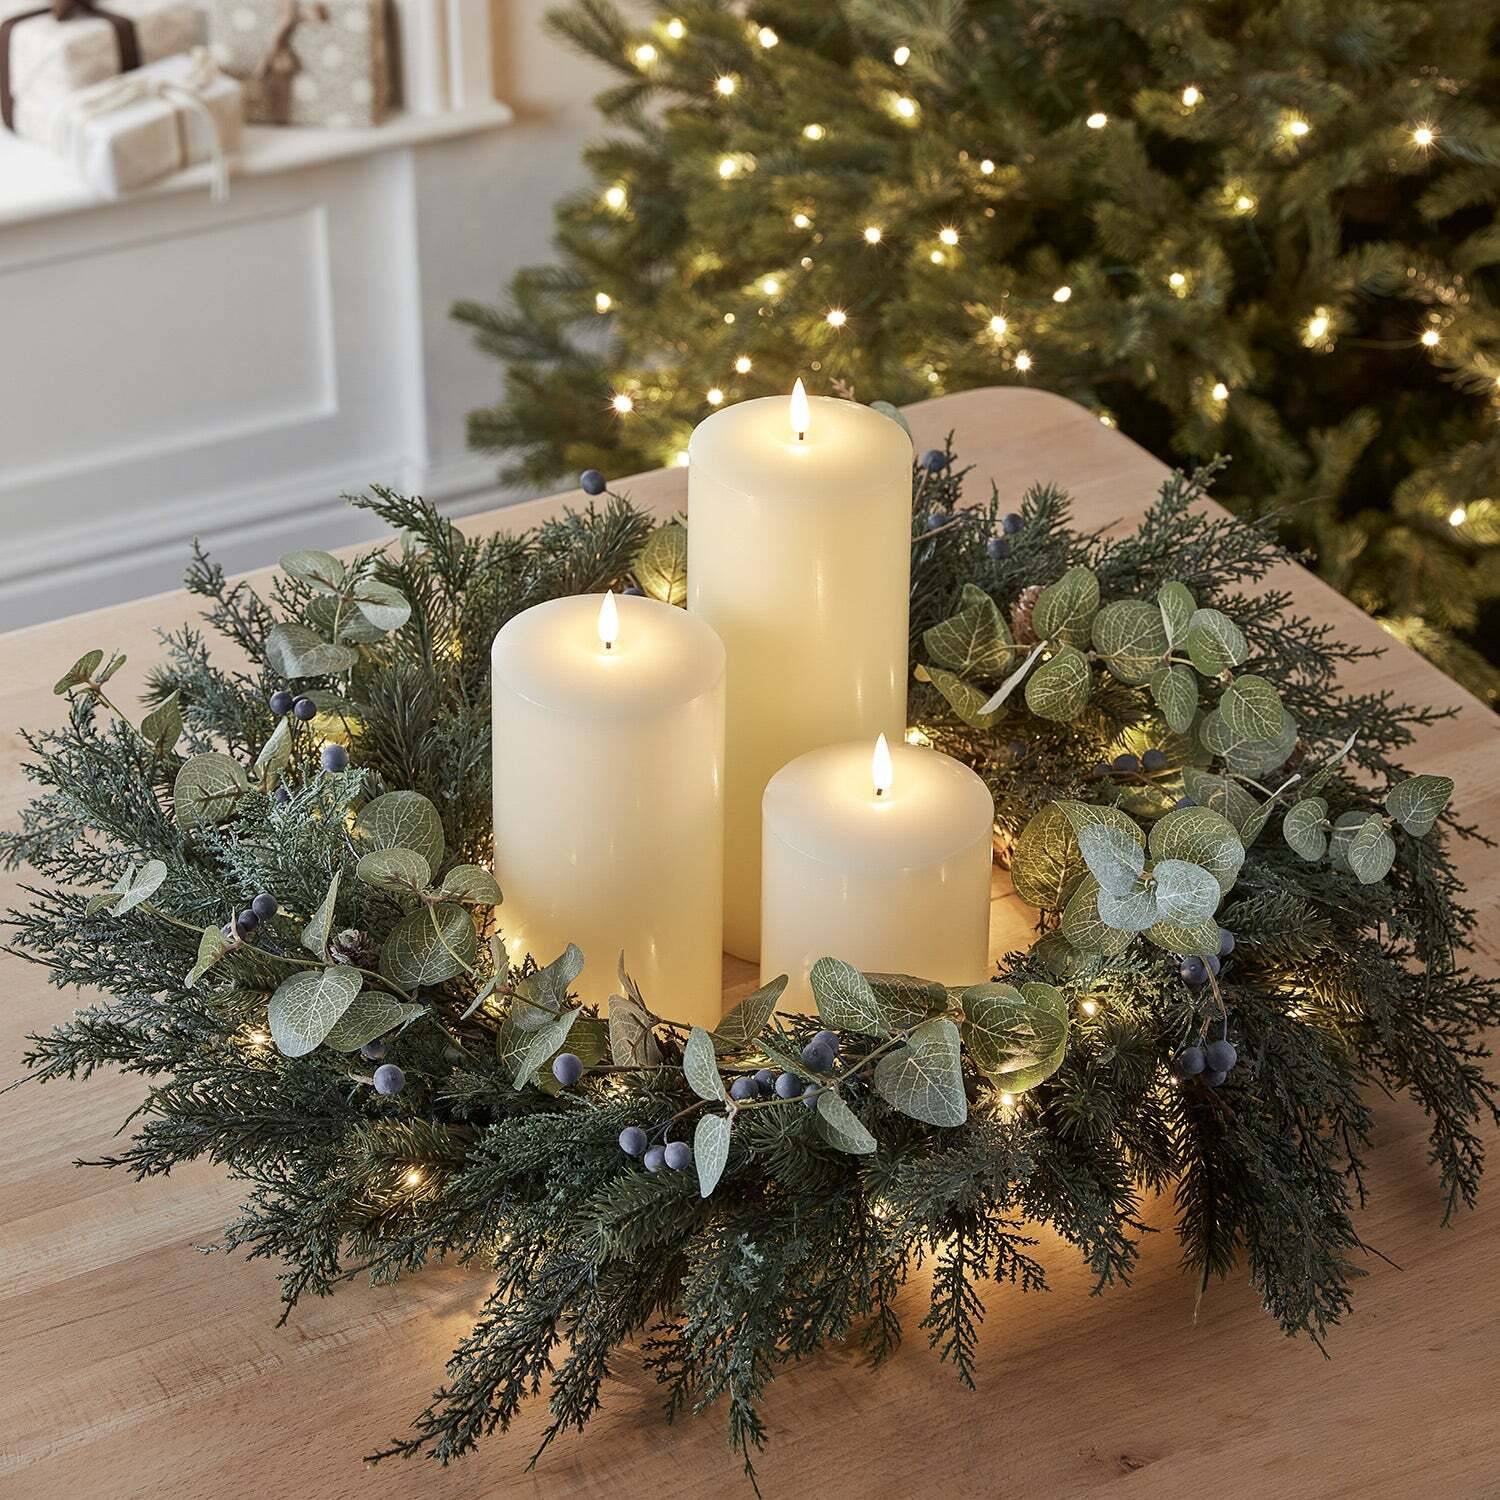 66cm Pre Lit Oversized Frosted Berry and Pinecone Wreath & TruGlow® LED Candle Bundle - image 1